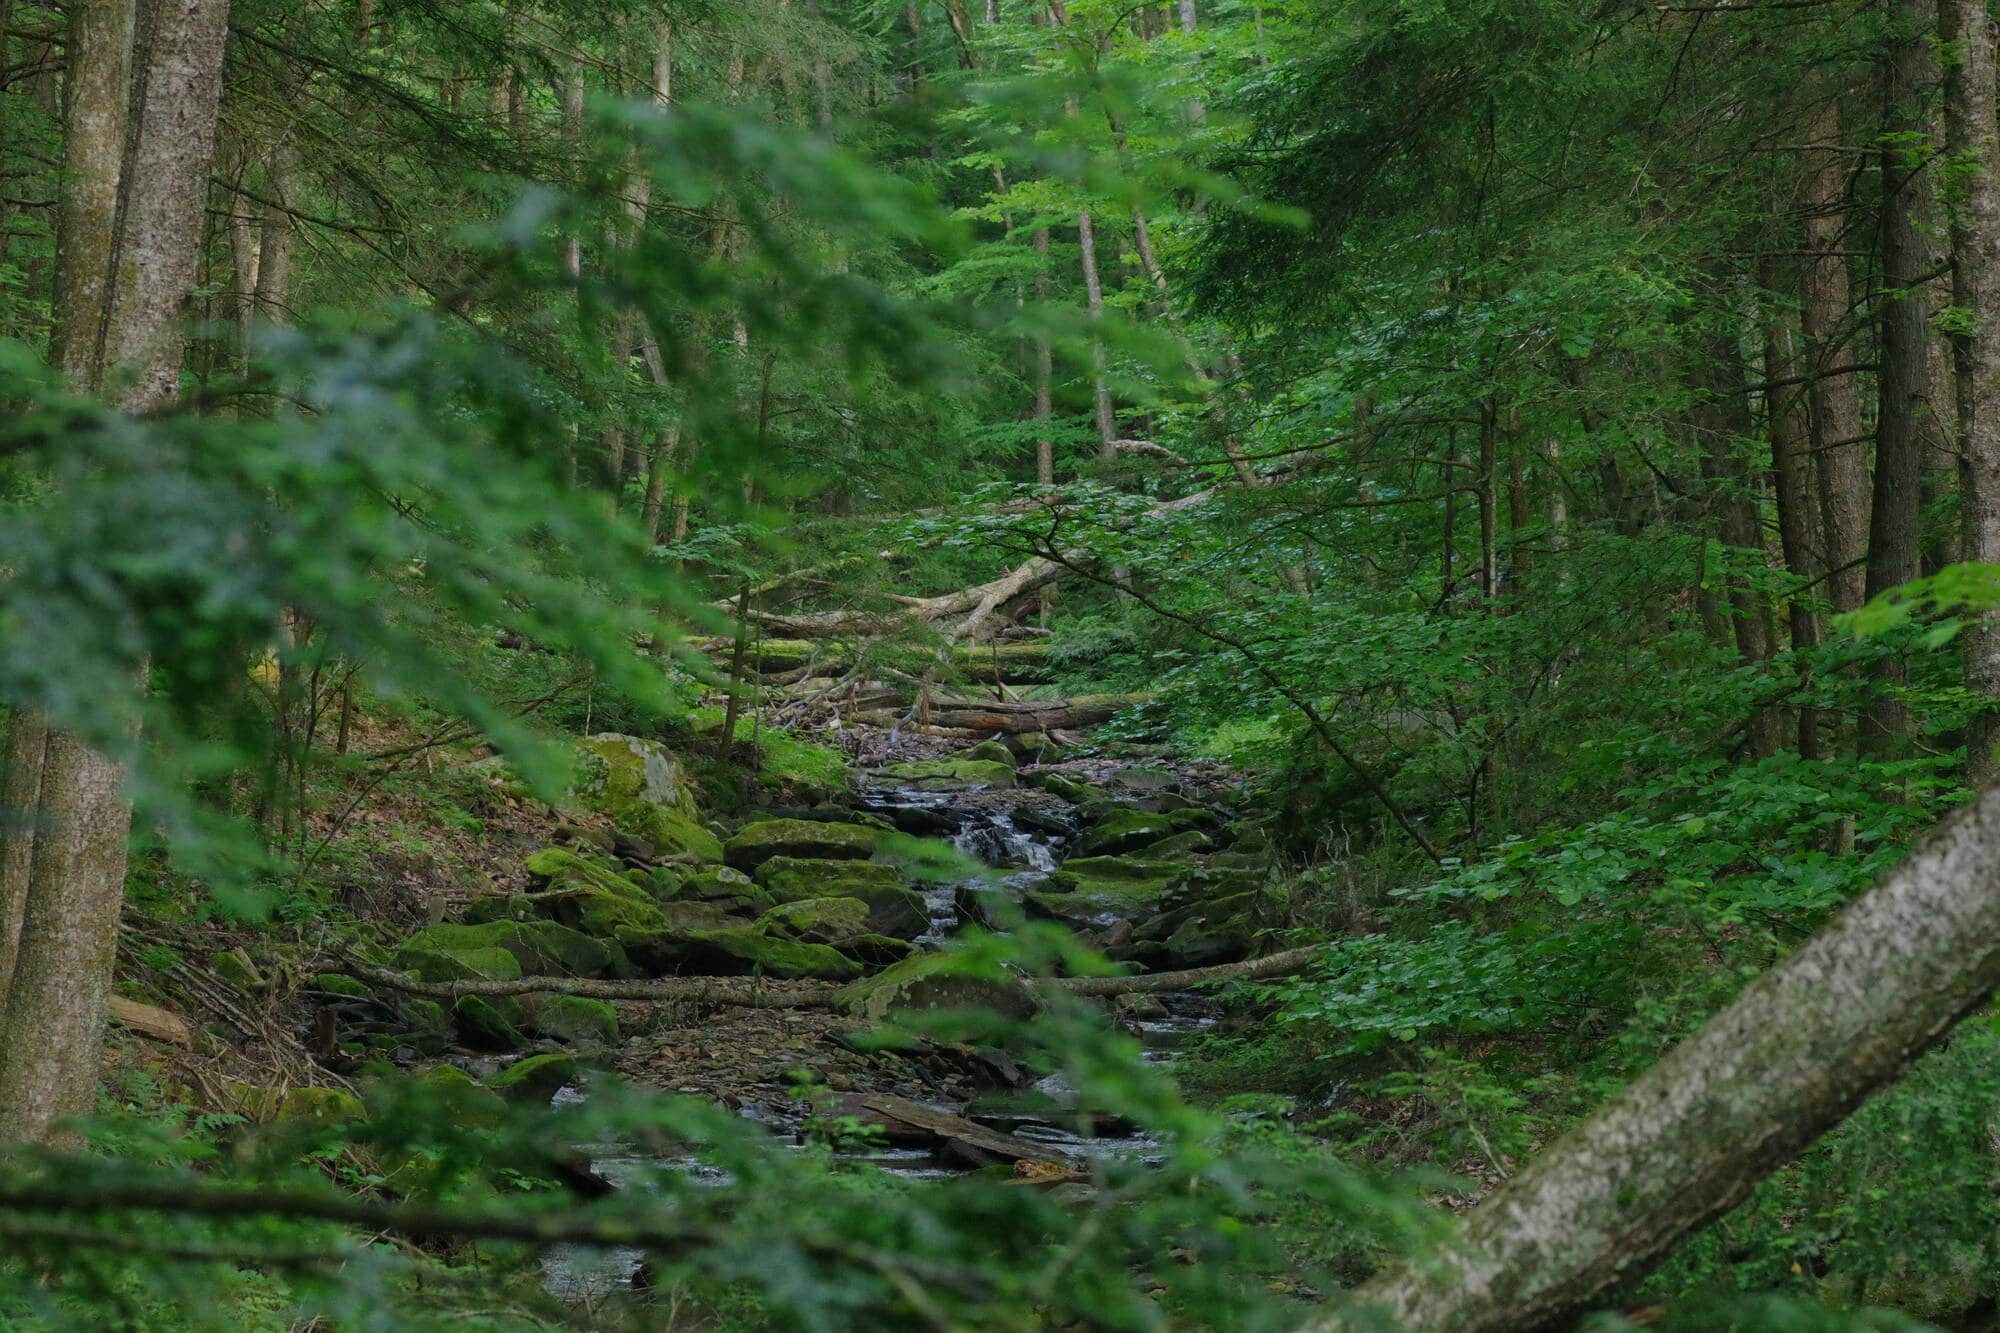 A stream in the forest